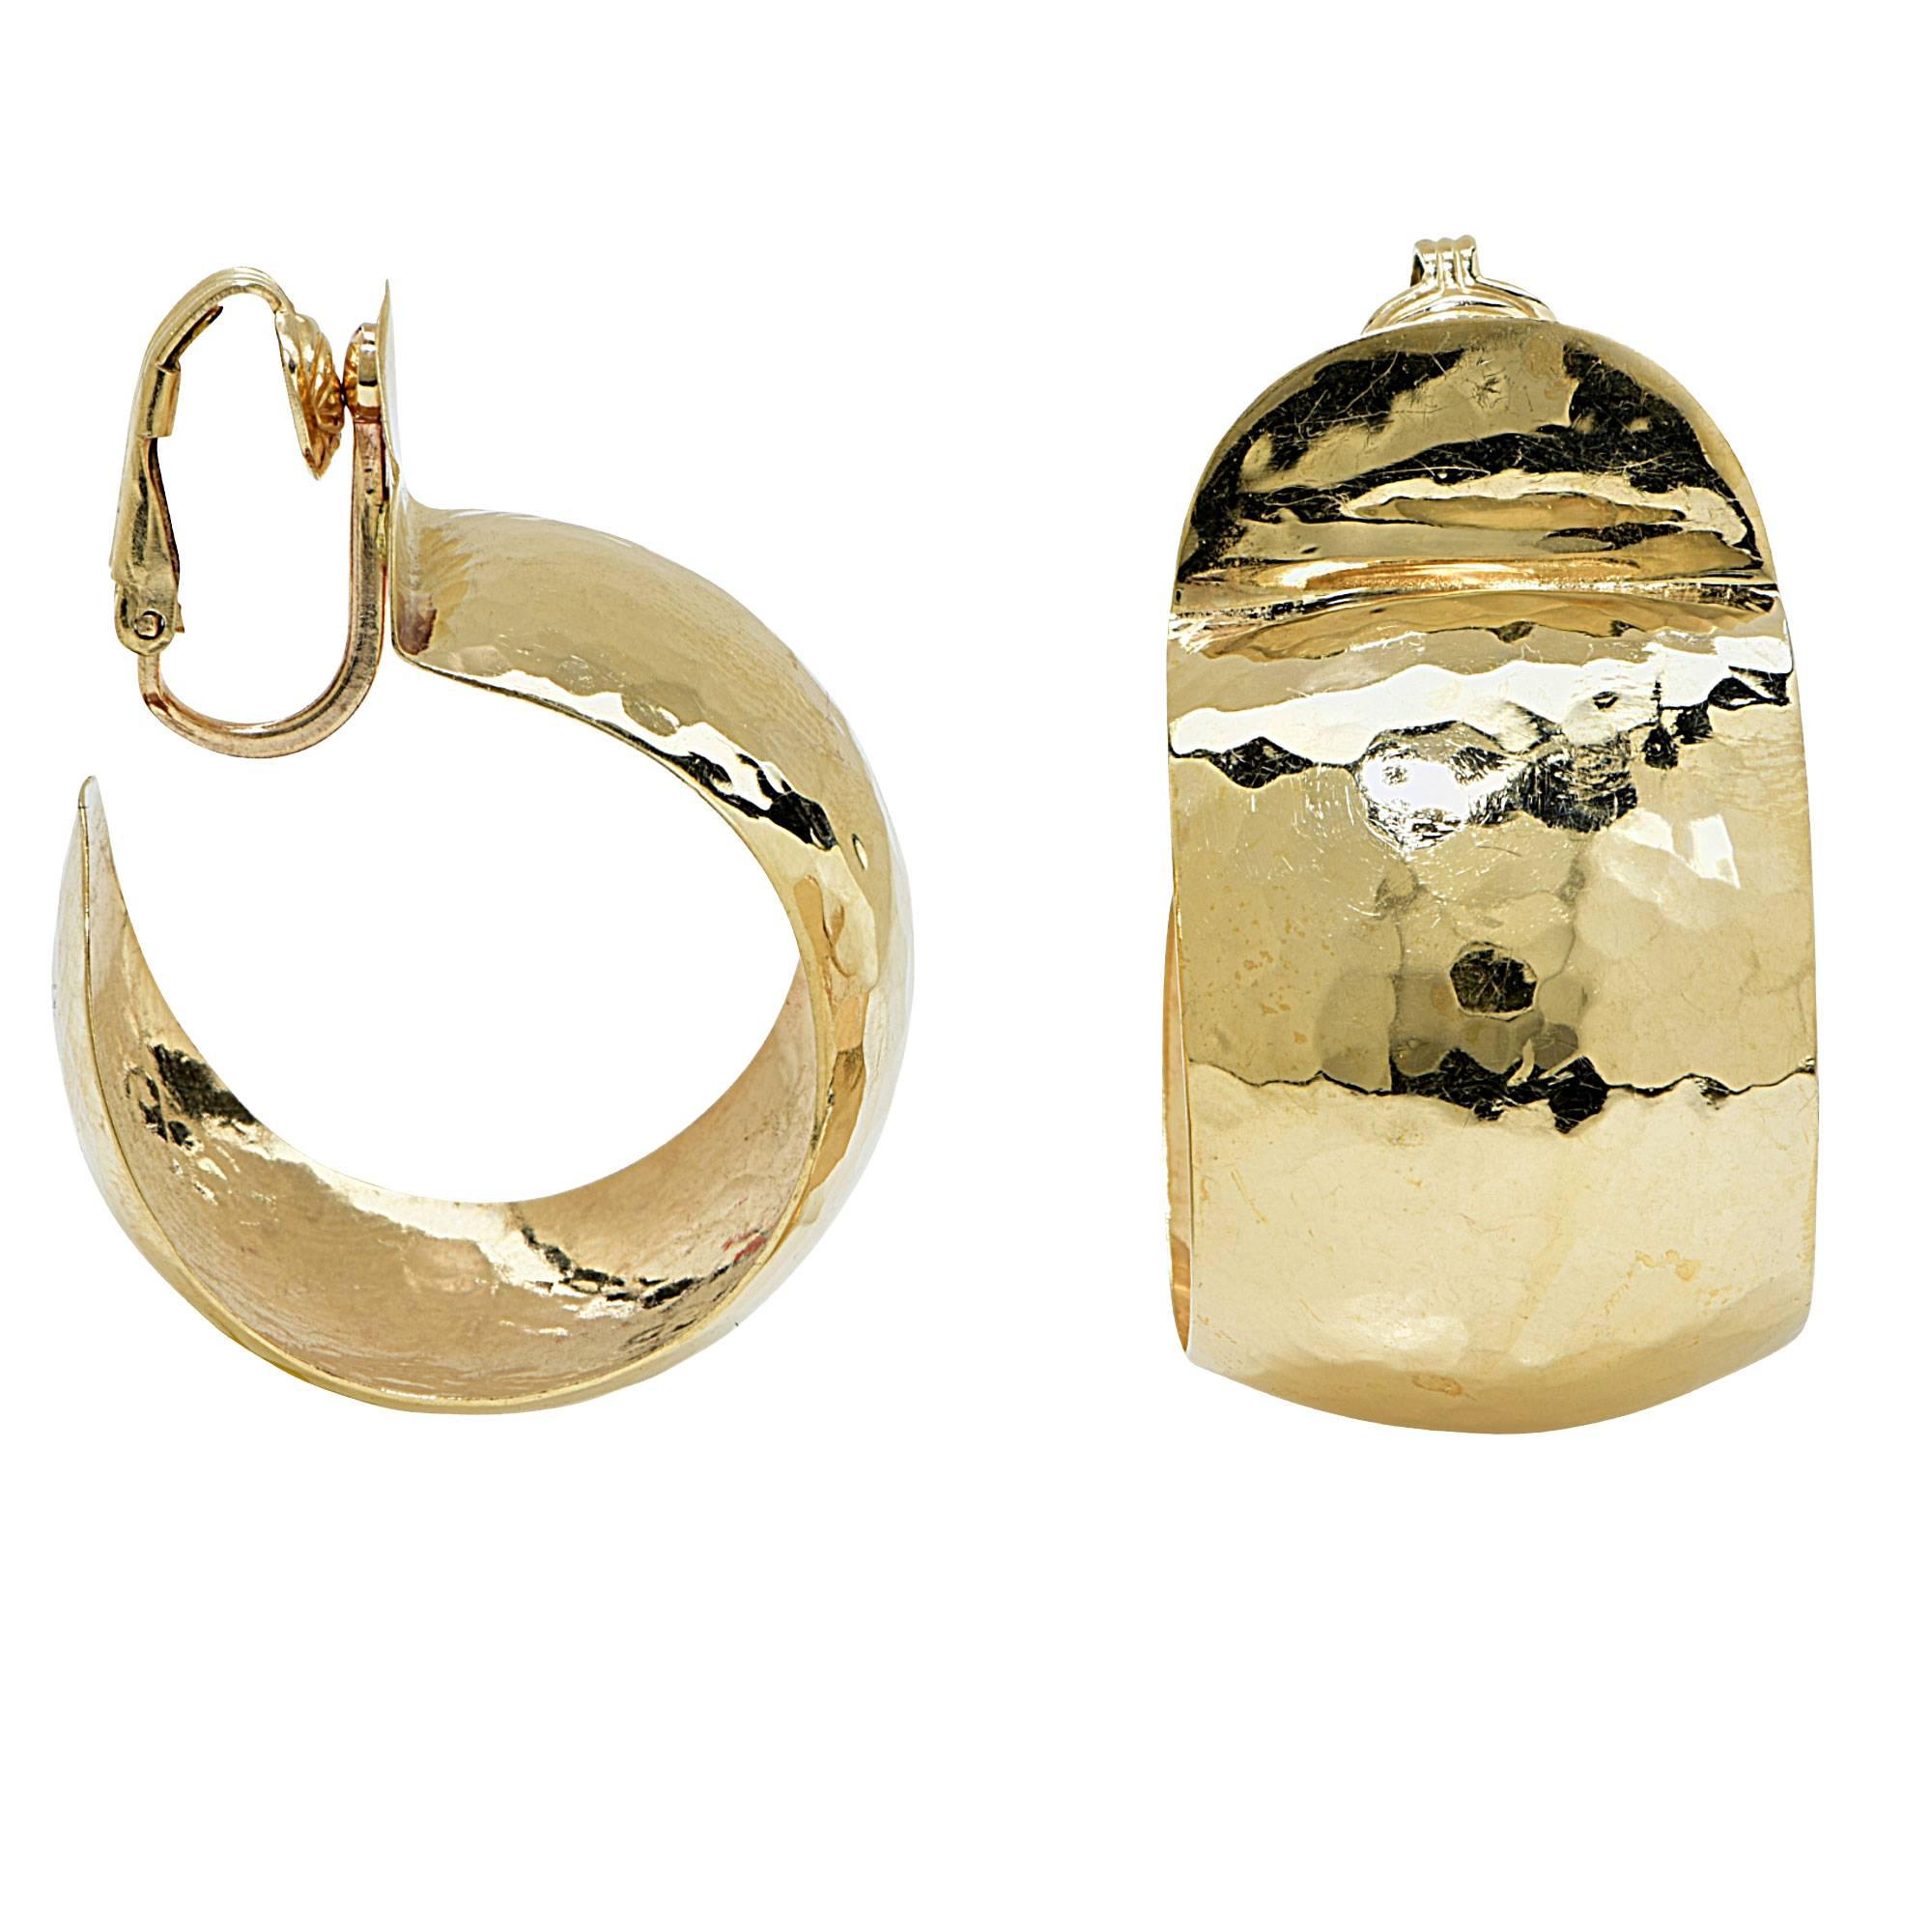 14k yellow gold hoop earrings.

Metal weight: 11.19 grams

These yellow gold earrings are accompanied by a retail appraisal performed by a GIA Graduate Gemologist.